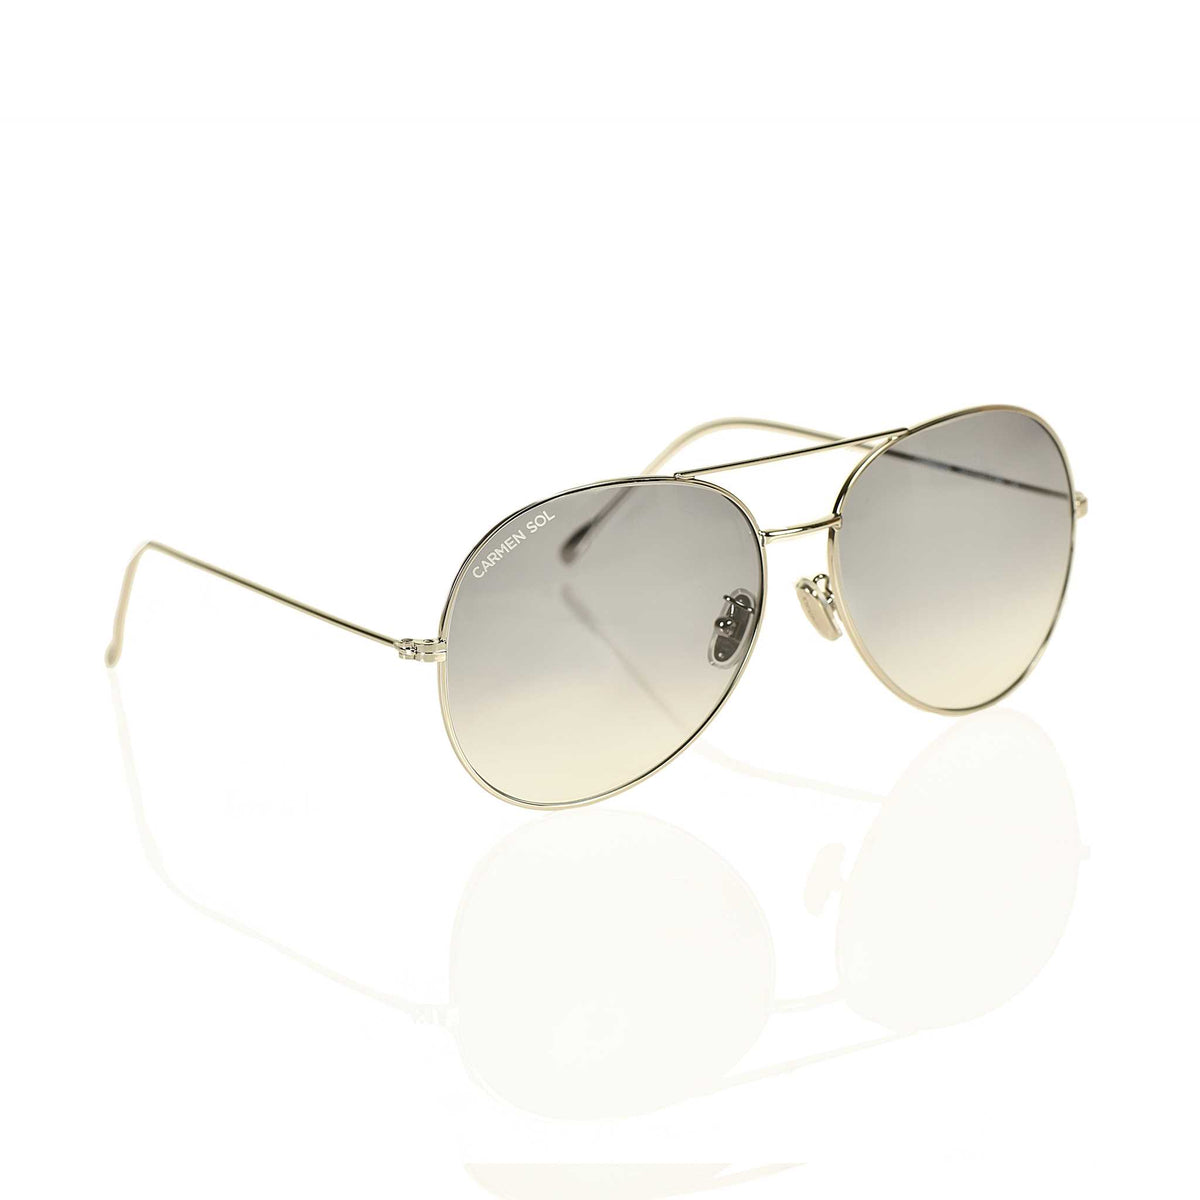 Gold sunglasses women with green lenses made in Italy